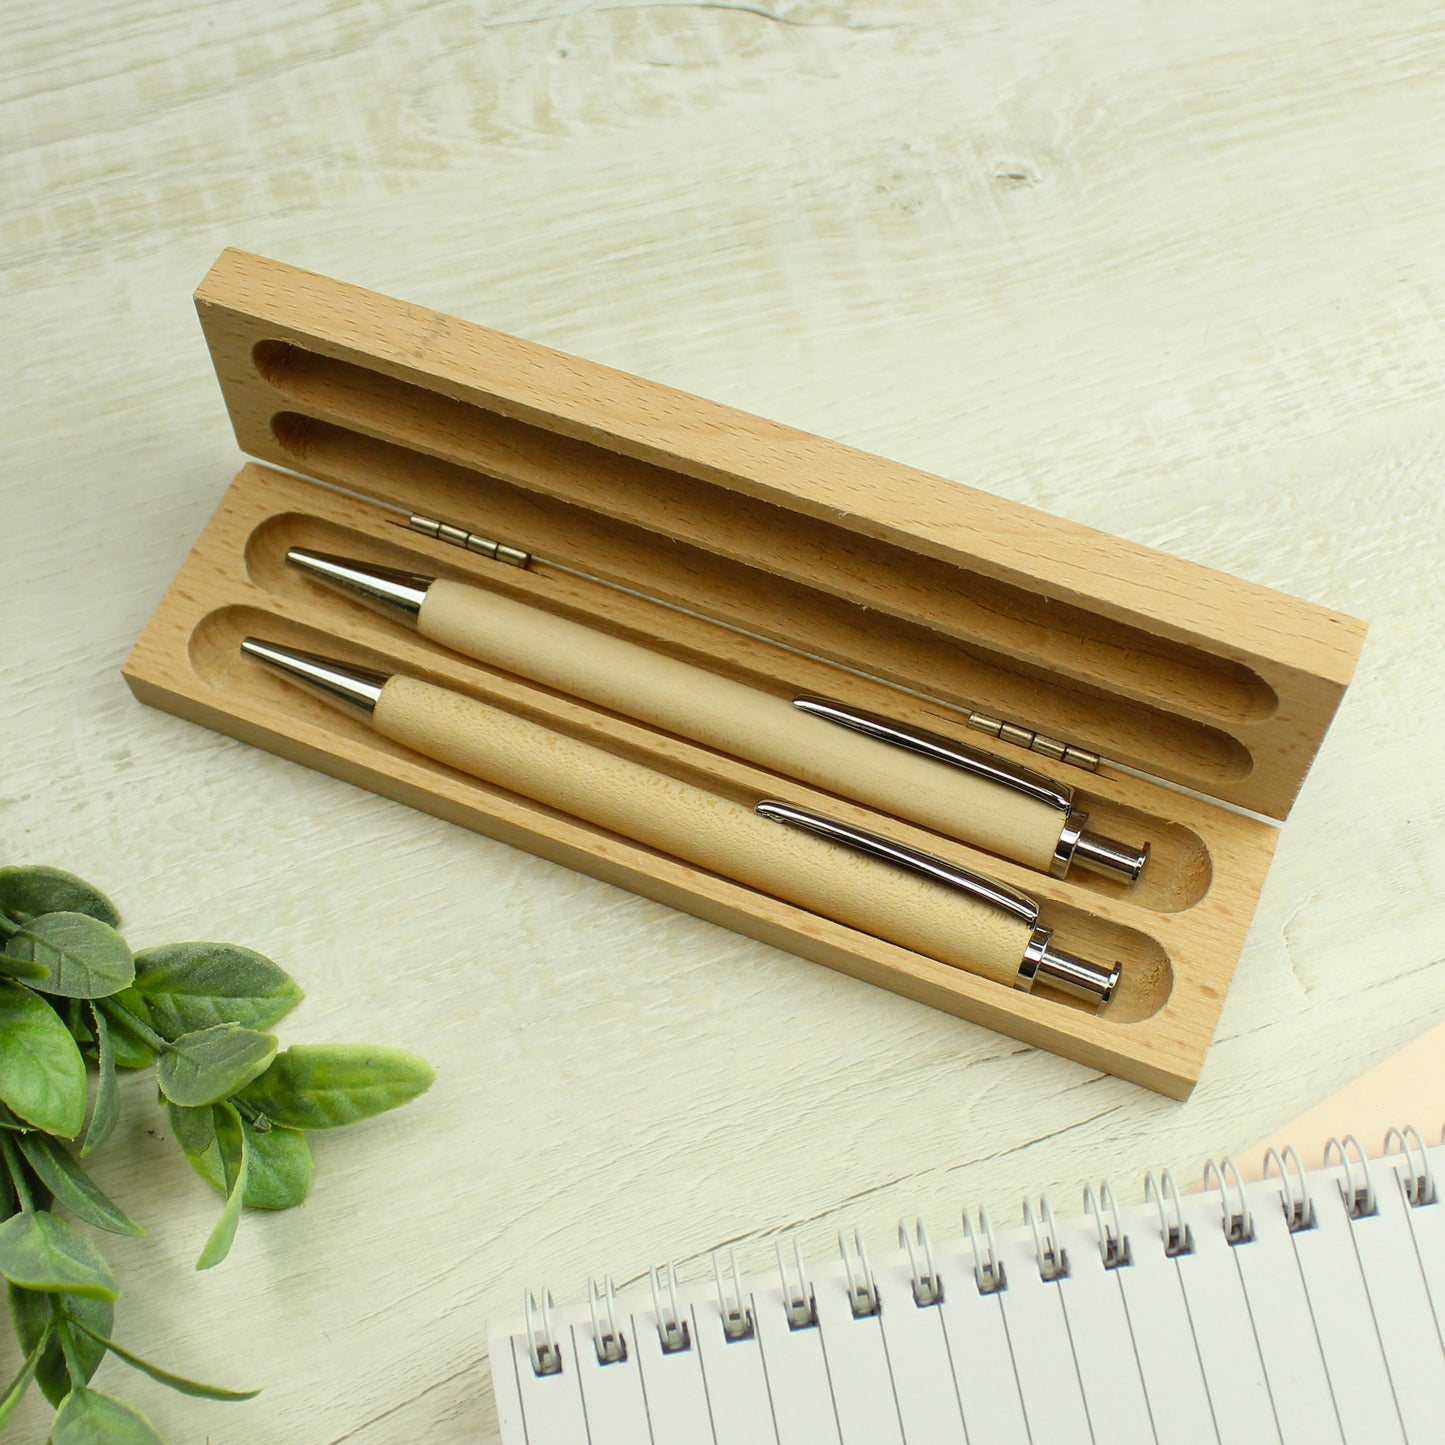 Personalised Wooden Pen And Pencil Set